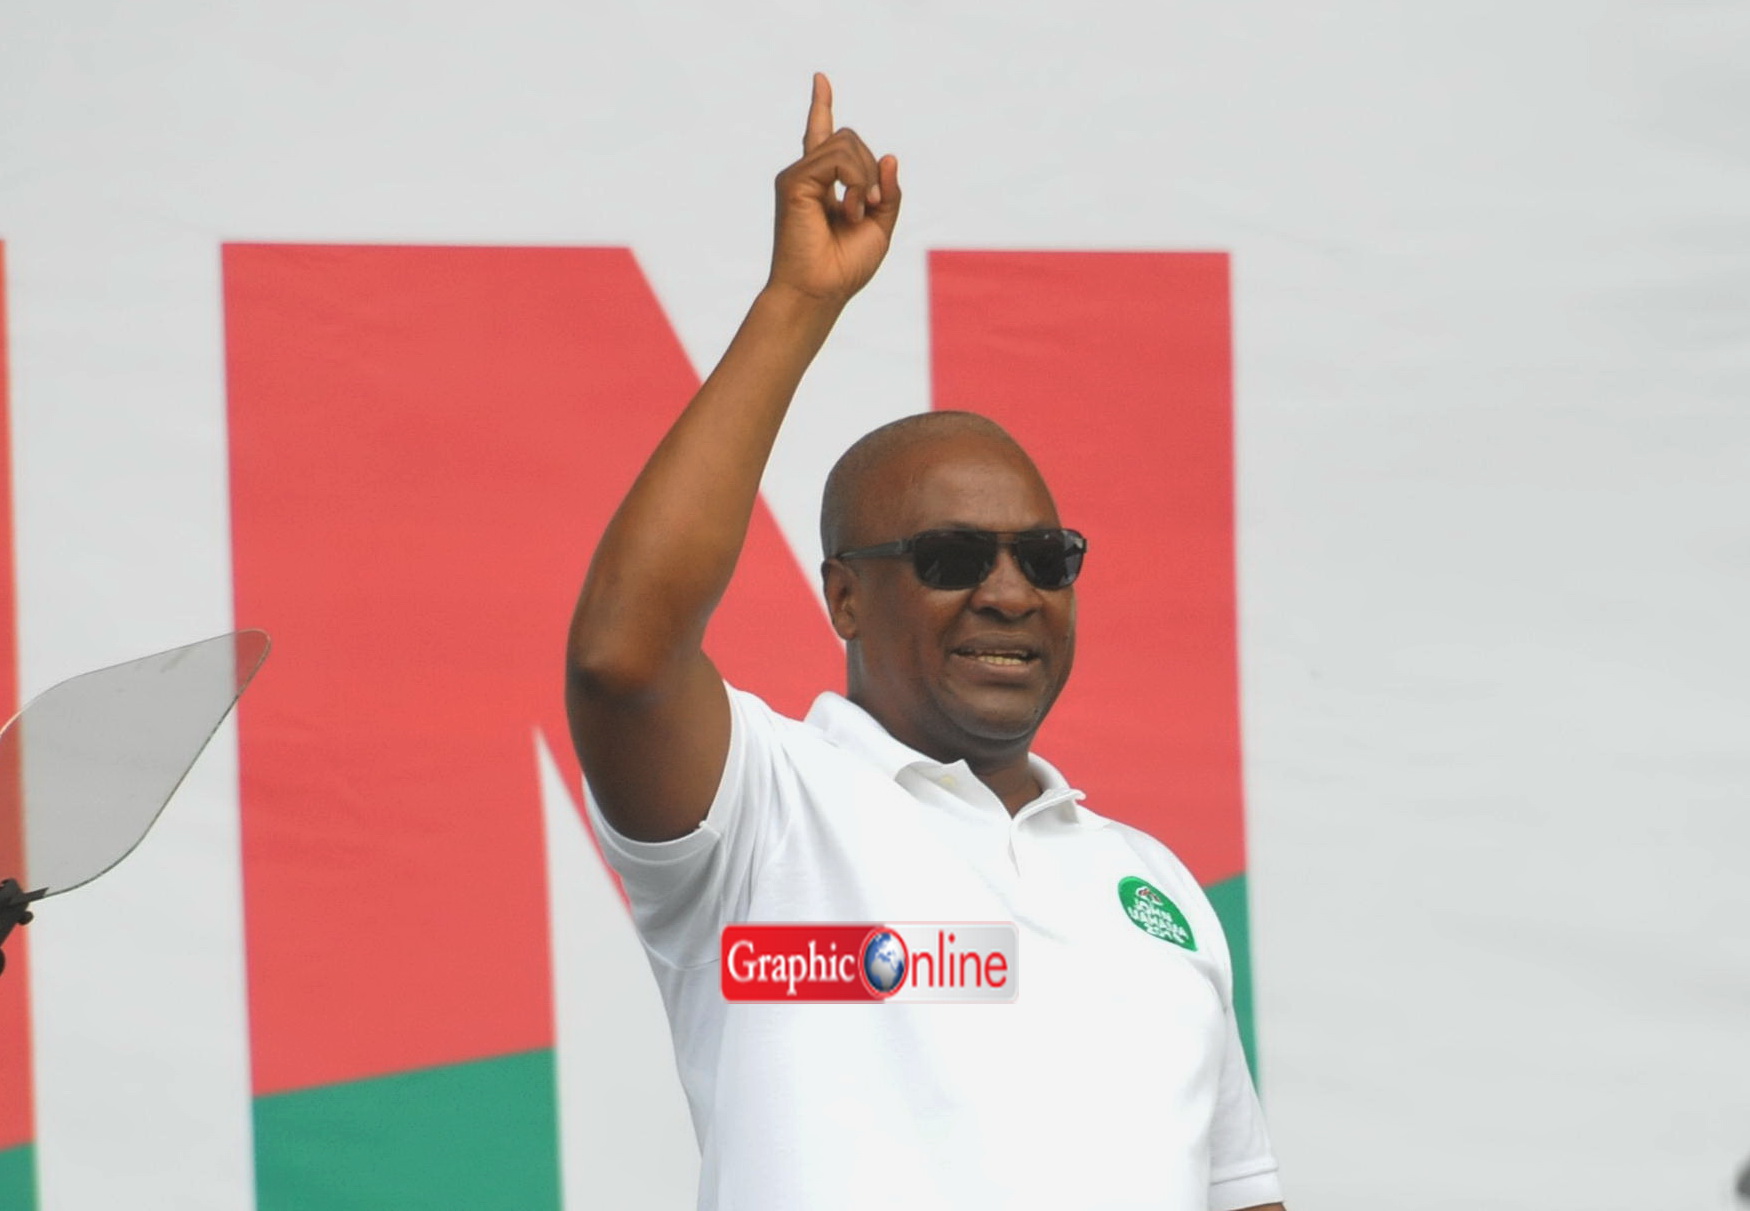 NDC Minority MPs endorse Mahama's candidature for 2020